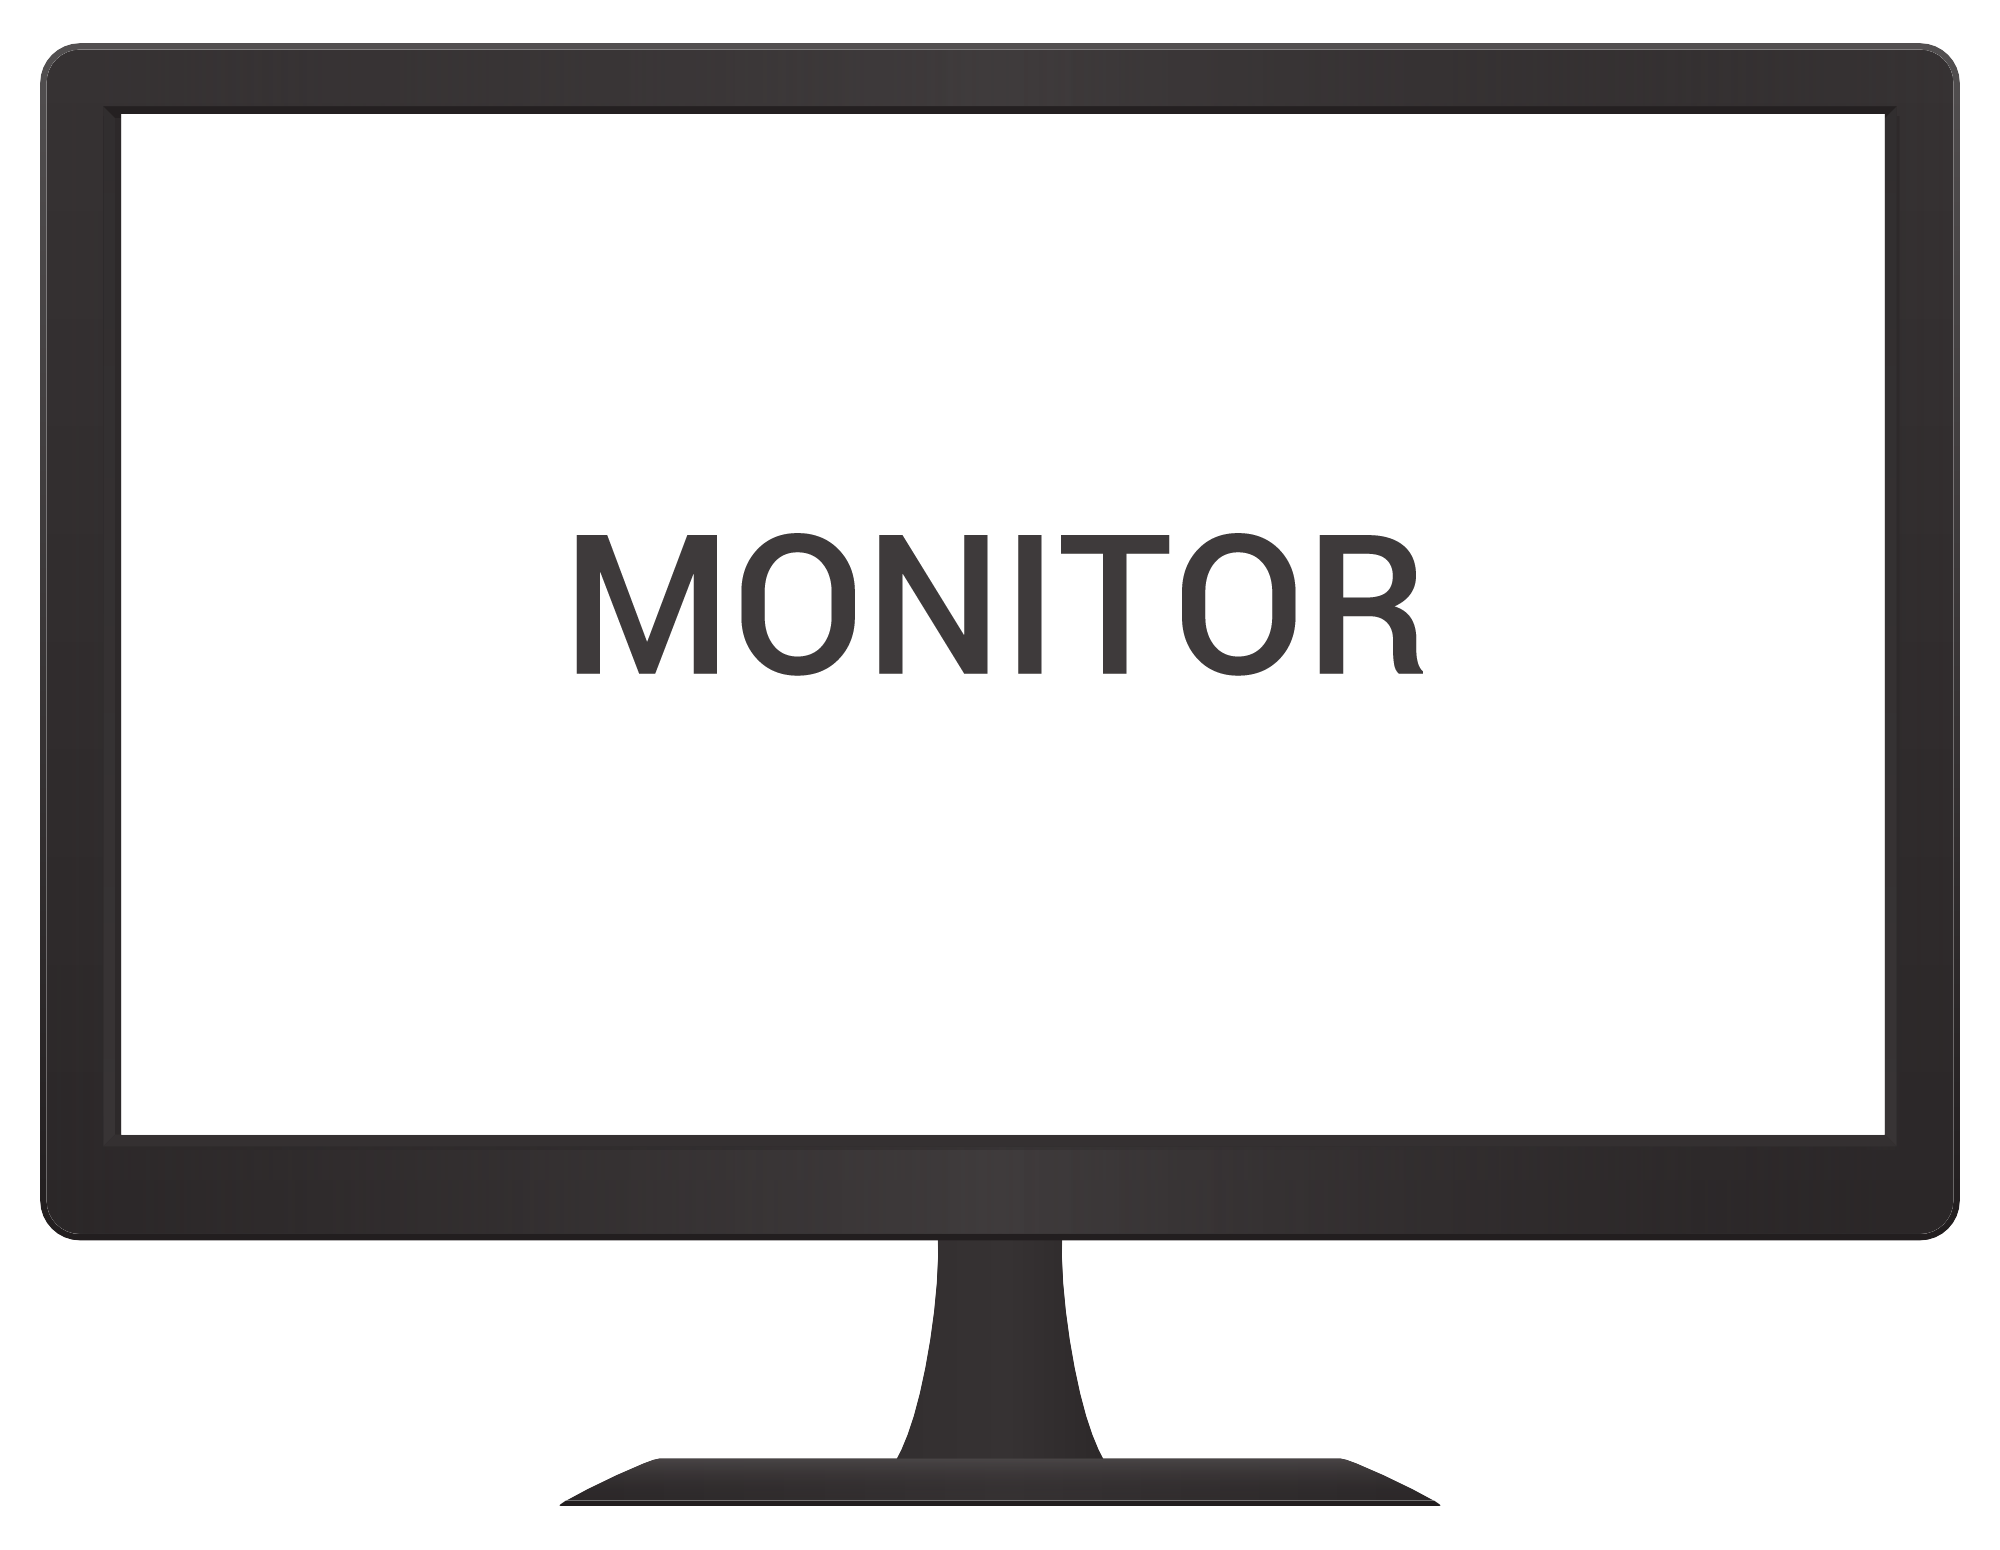 Monitor Png 2000 X 1550